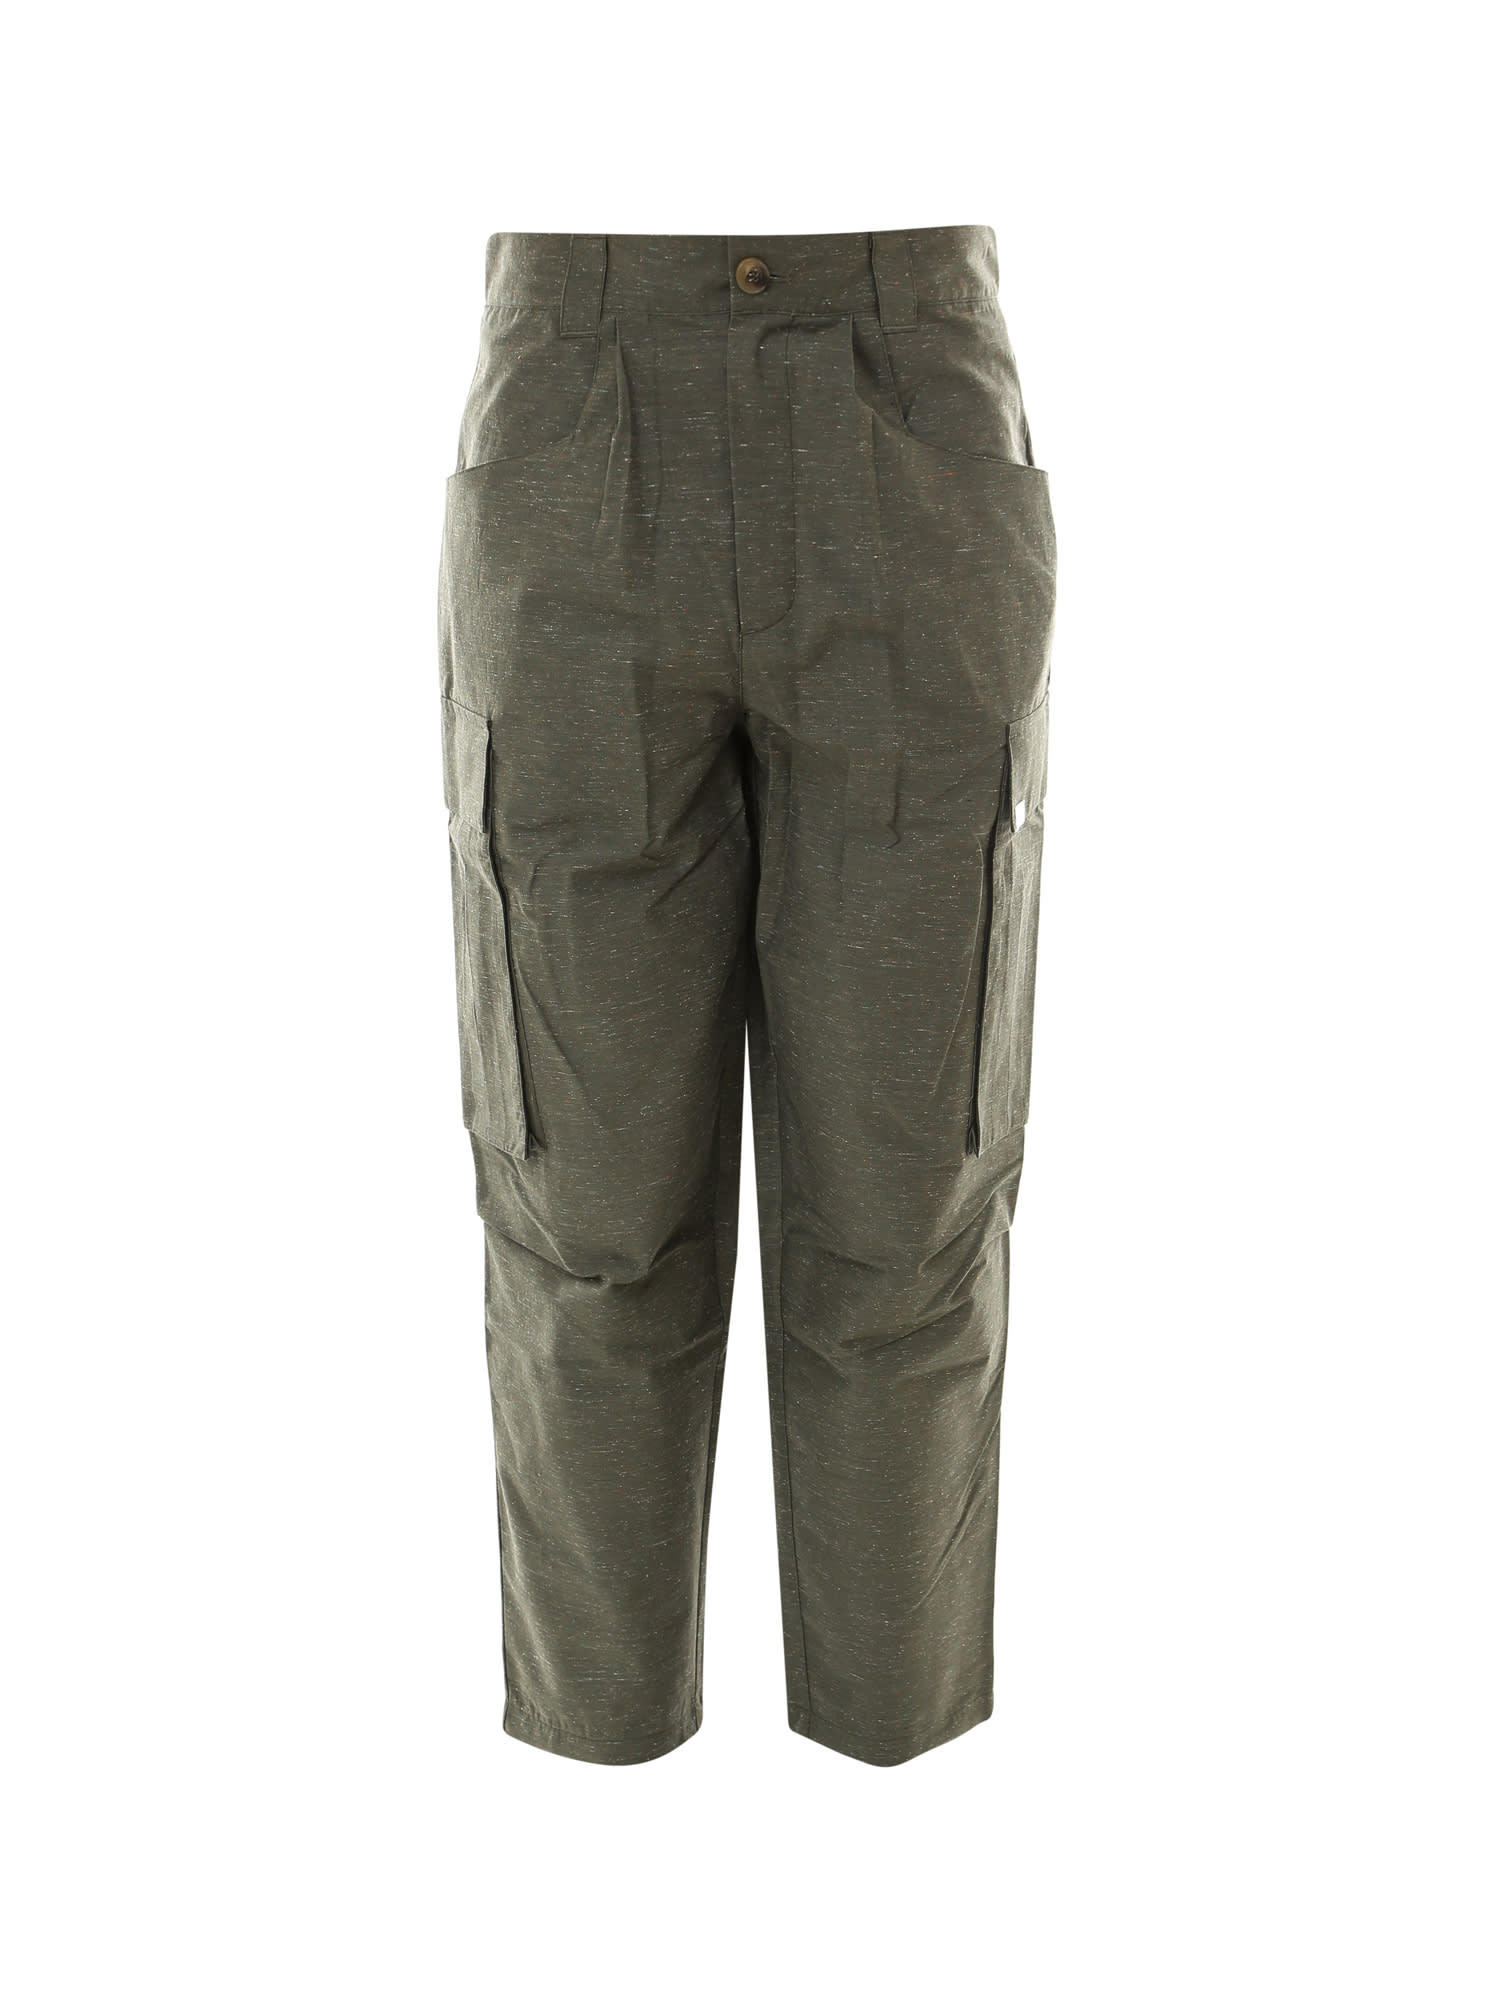 THE SILTED COMPANY TROUSER,RKVEFR FOREST